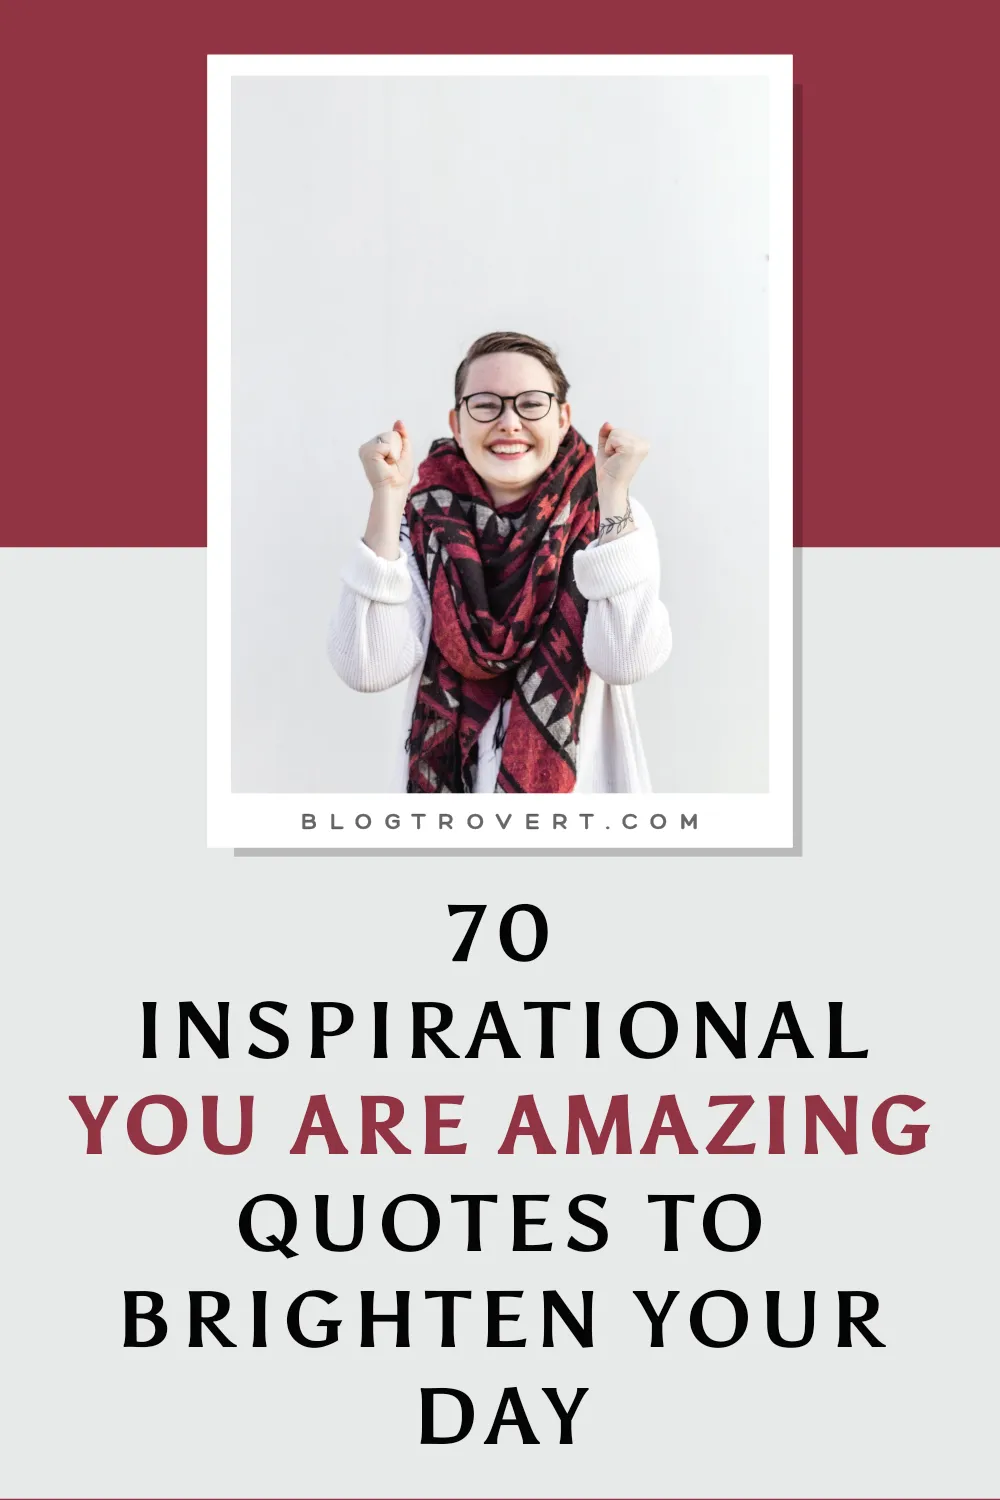 70 inspirational you are amazing quotes to Brighten Your Day 3